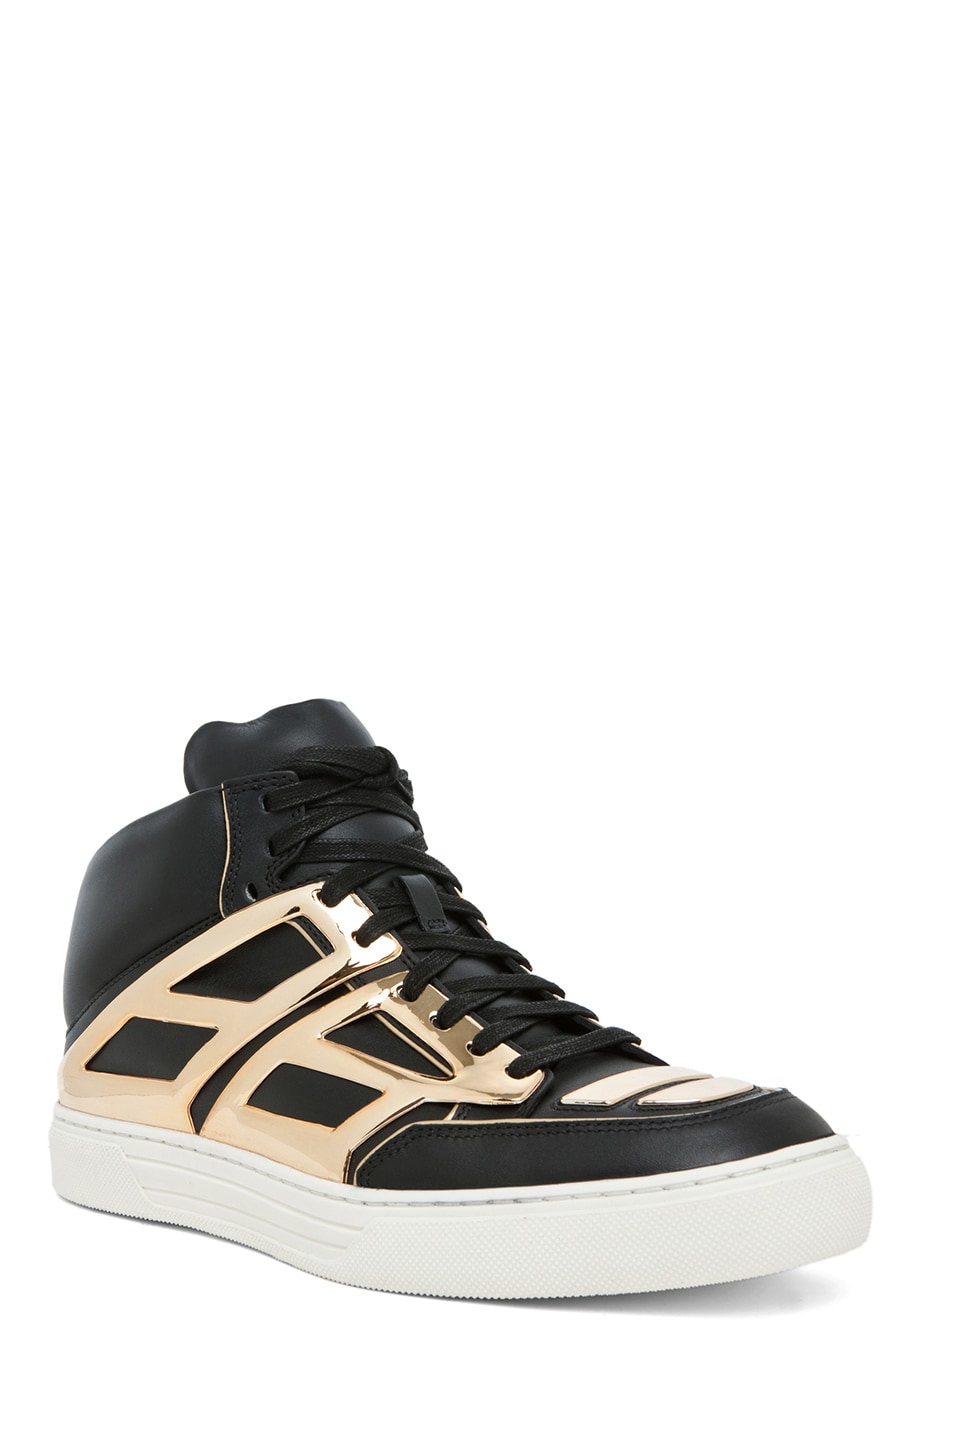 Image 1 of Alejandro Ingelmo Tron Glove Leather Mid Top in Black & Gold